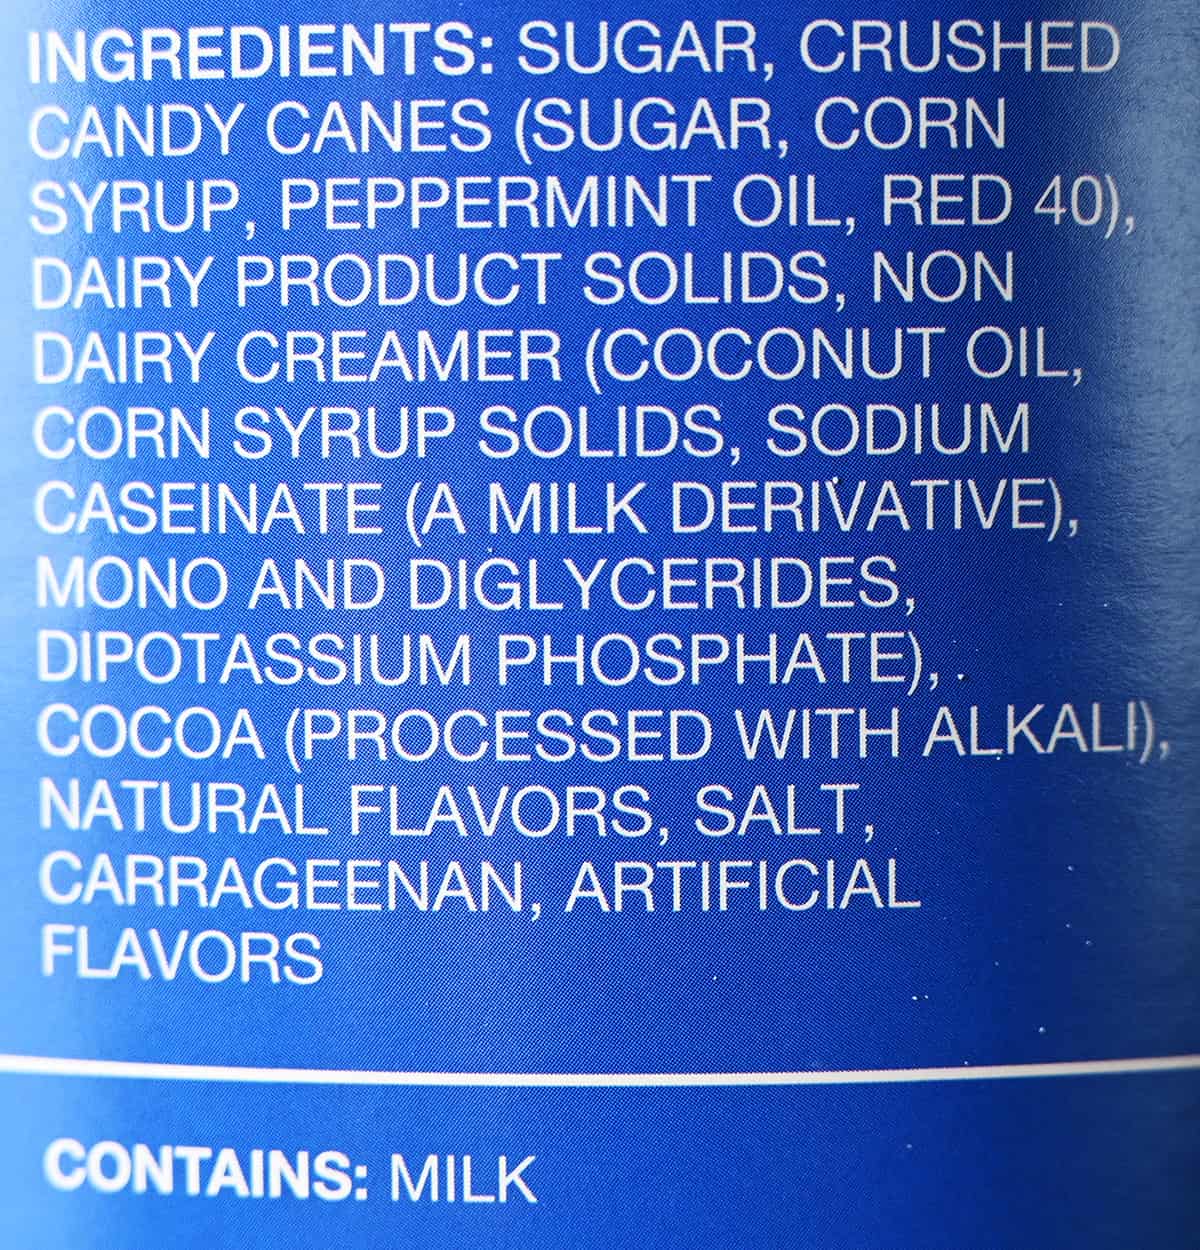 Image of the candycane hot cocoa ingredients from the back of the container.